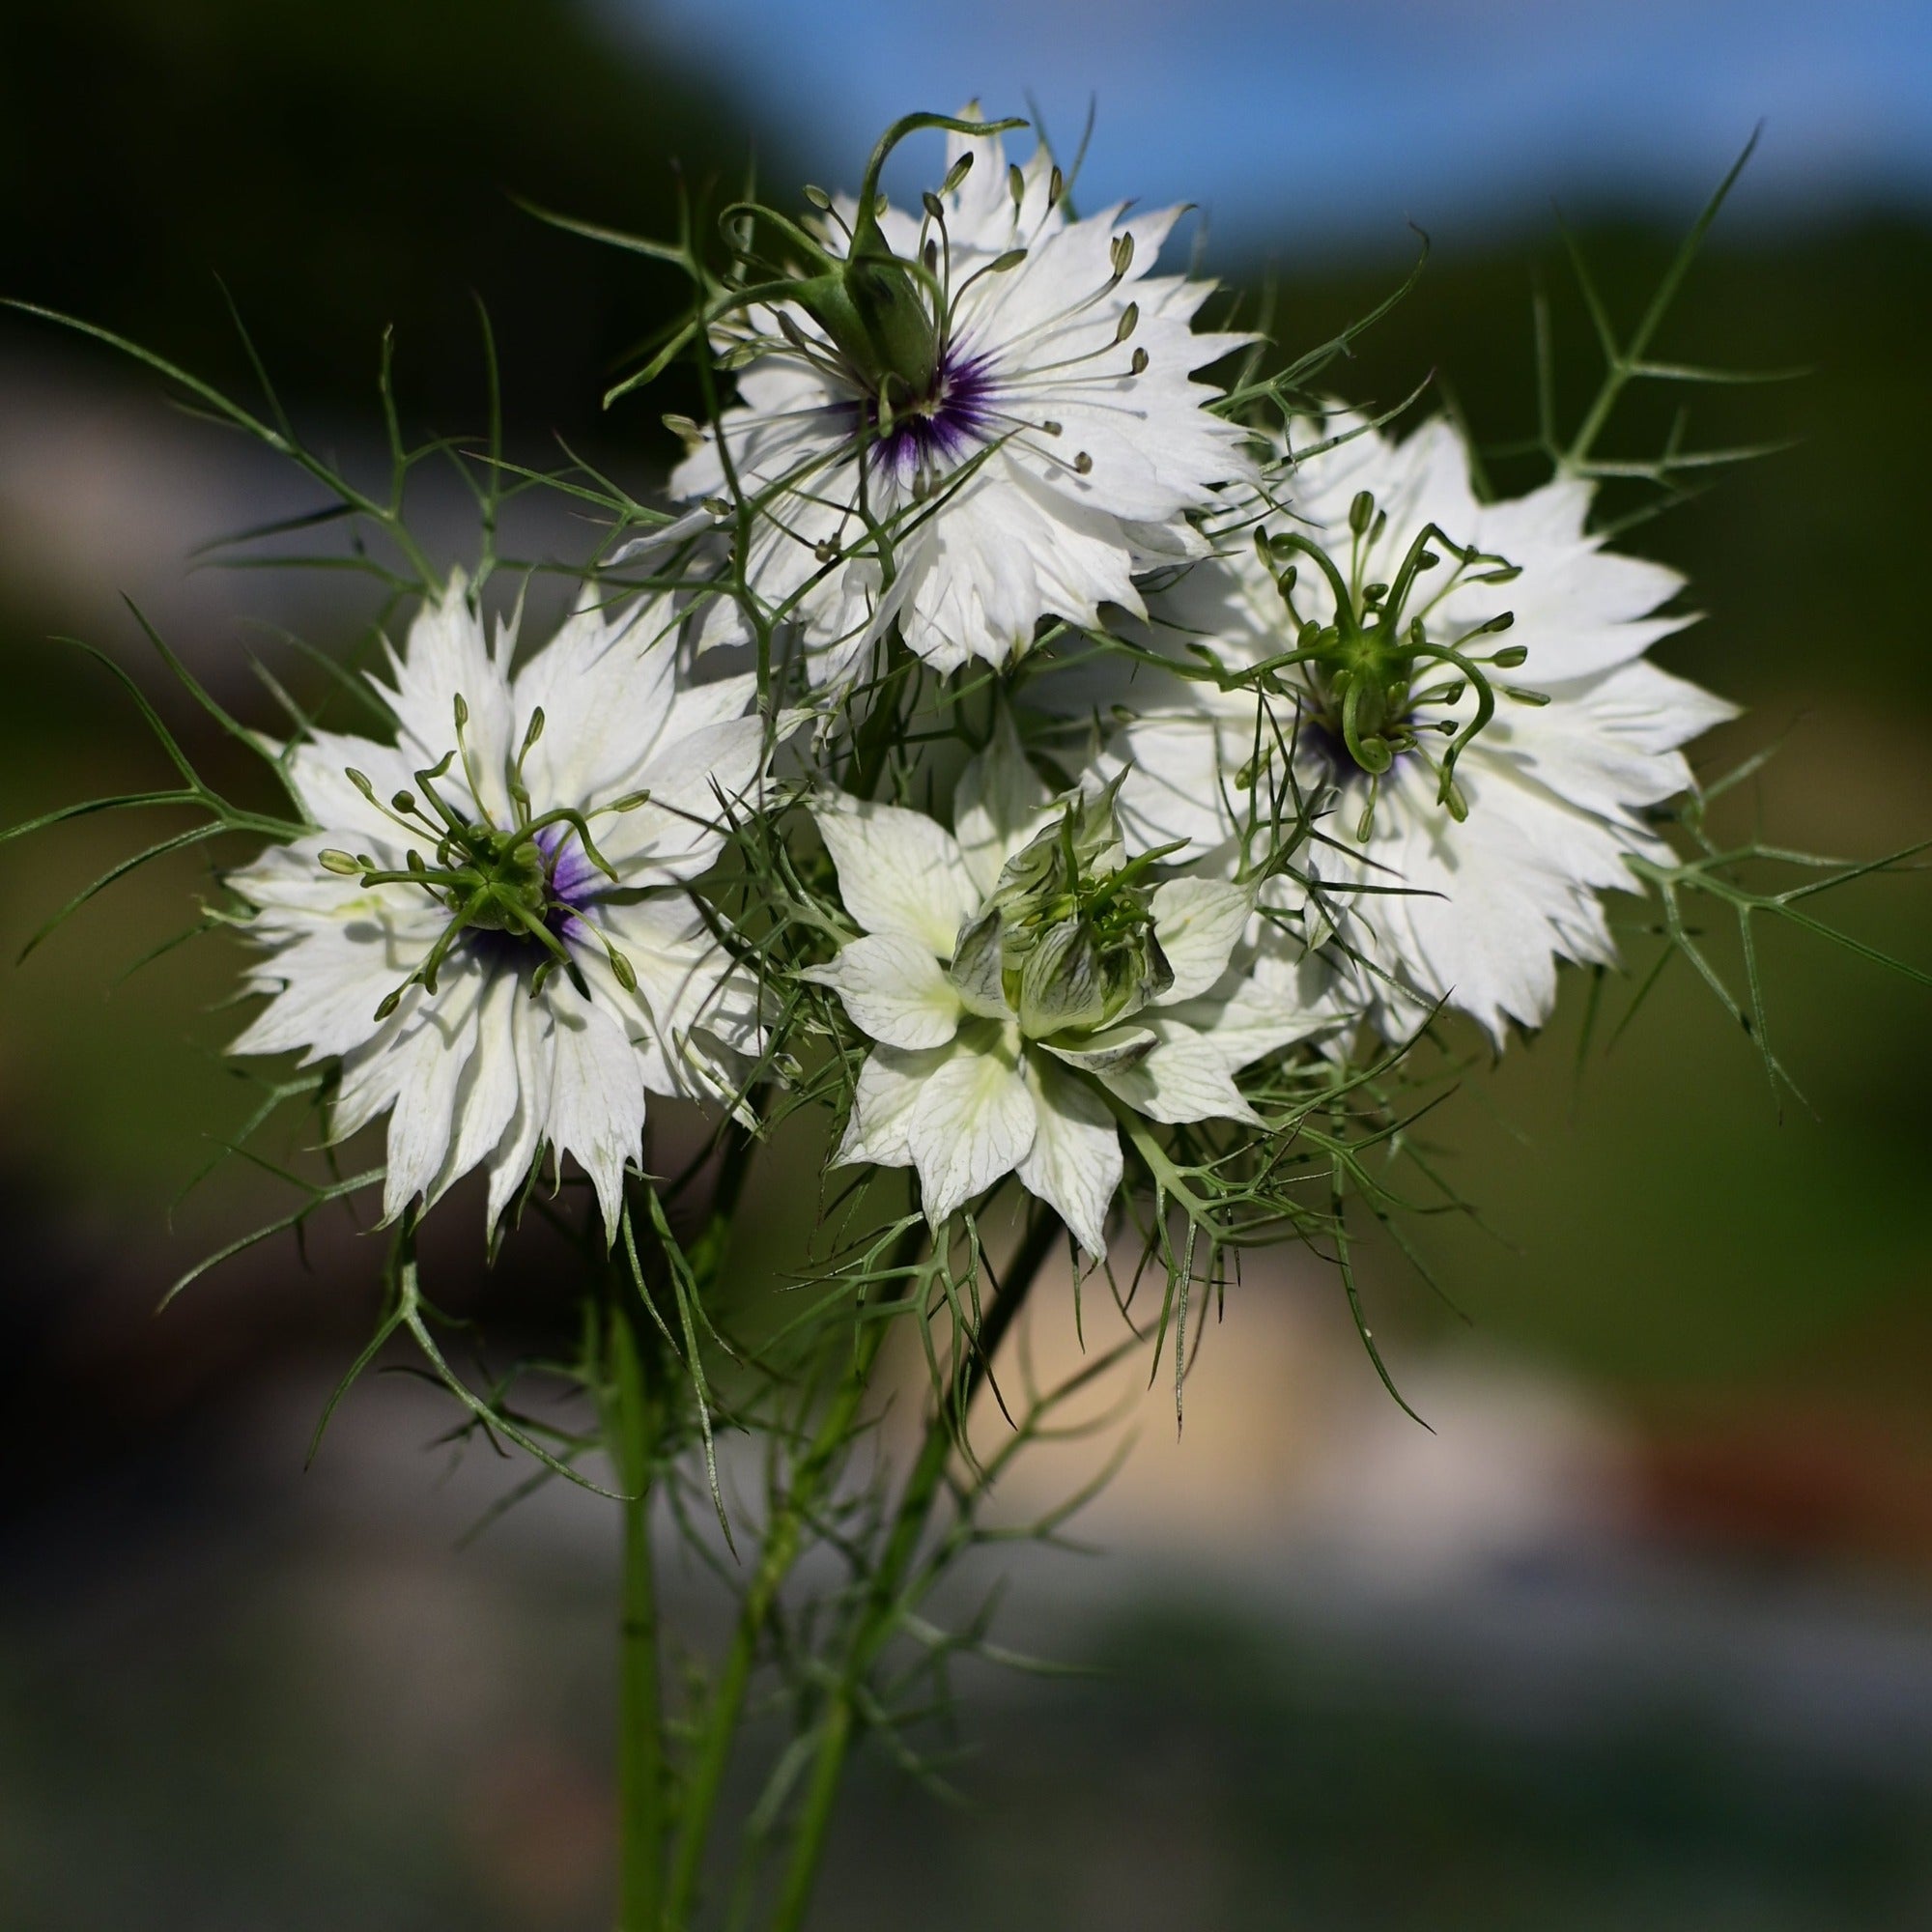 A group of love-in-a-mist flowers, also known as nigella, held up against a blurry garden backgroudn